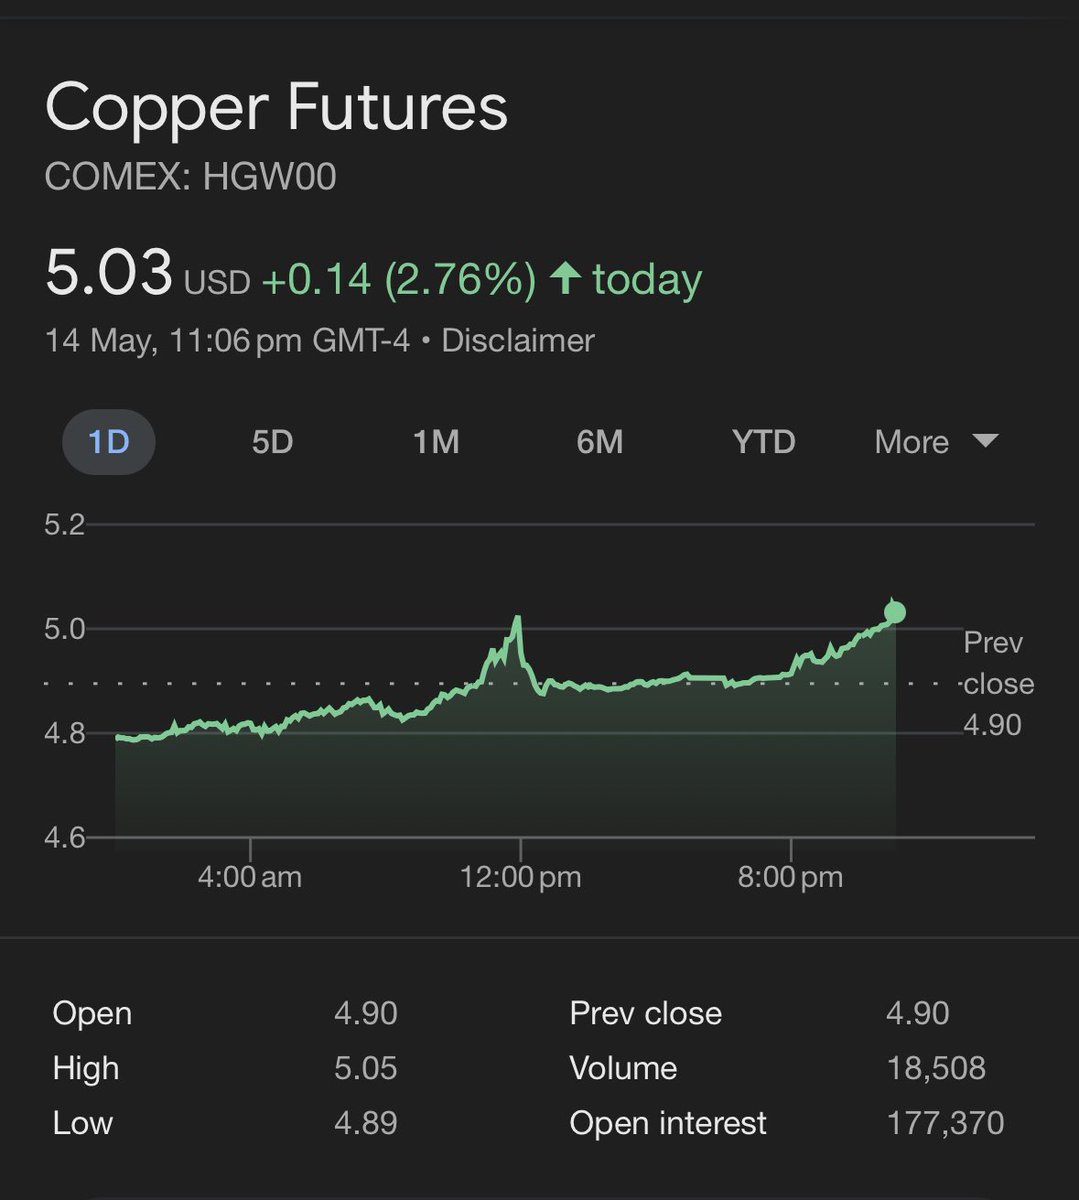 #copper now producing new ATH’s with every candle stick

Juniors need to play catch up, and should happen reasonably fast. 

#copper bull run is officially underway

$HCH $BHP $CYM $AW1 $HAV $QML